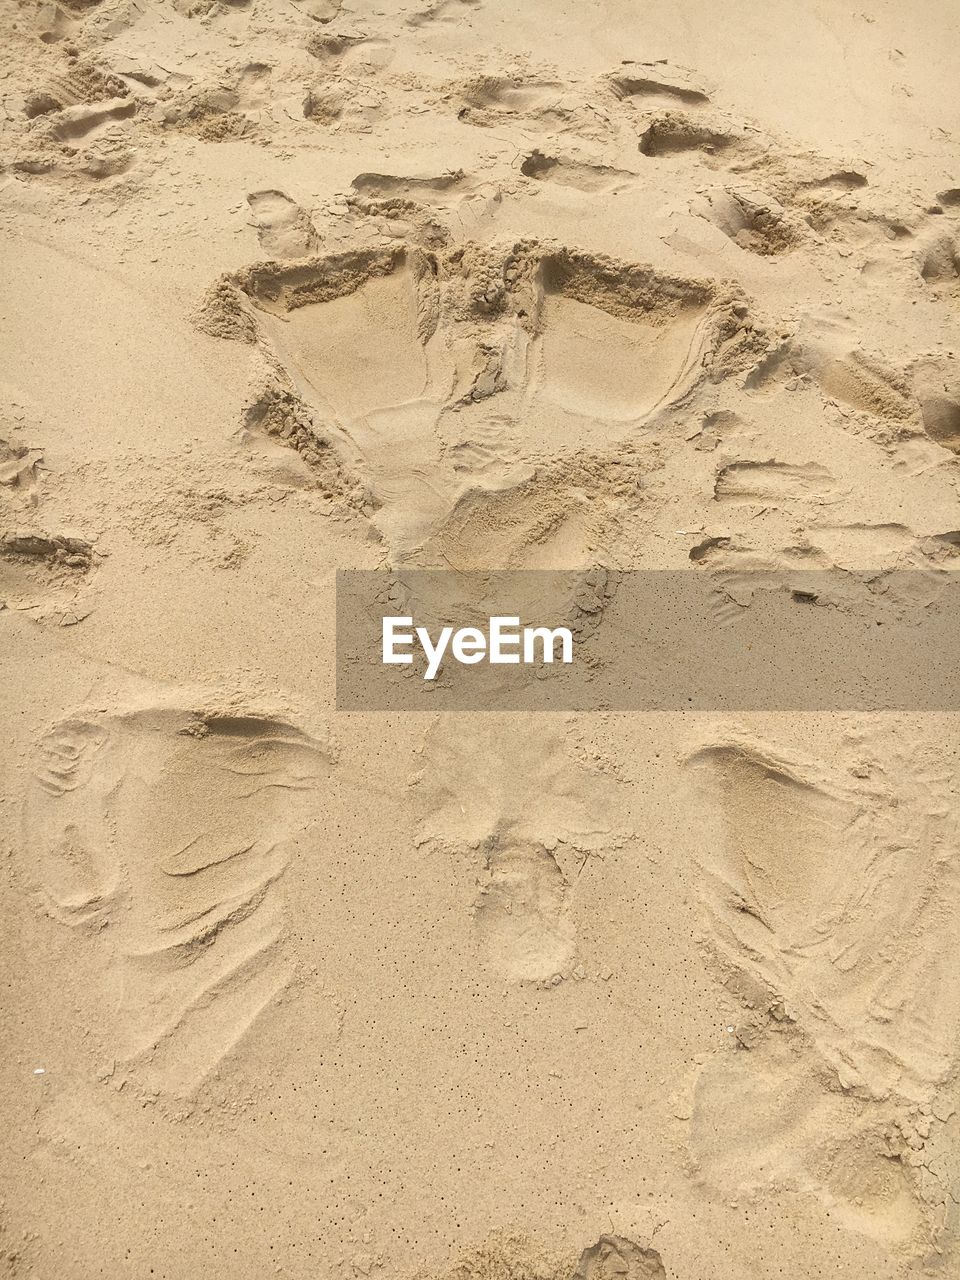 HIGH ANGLE VIEW OF FOOTPRINTS ON WET SAND